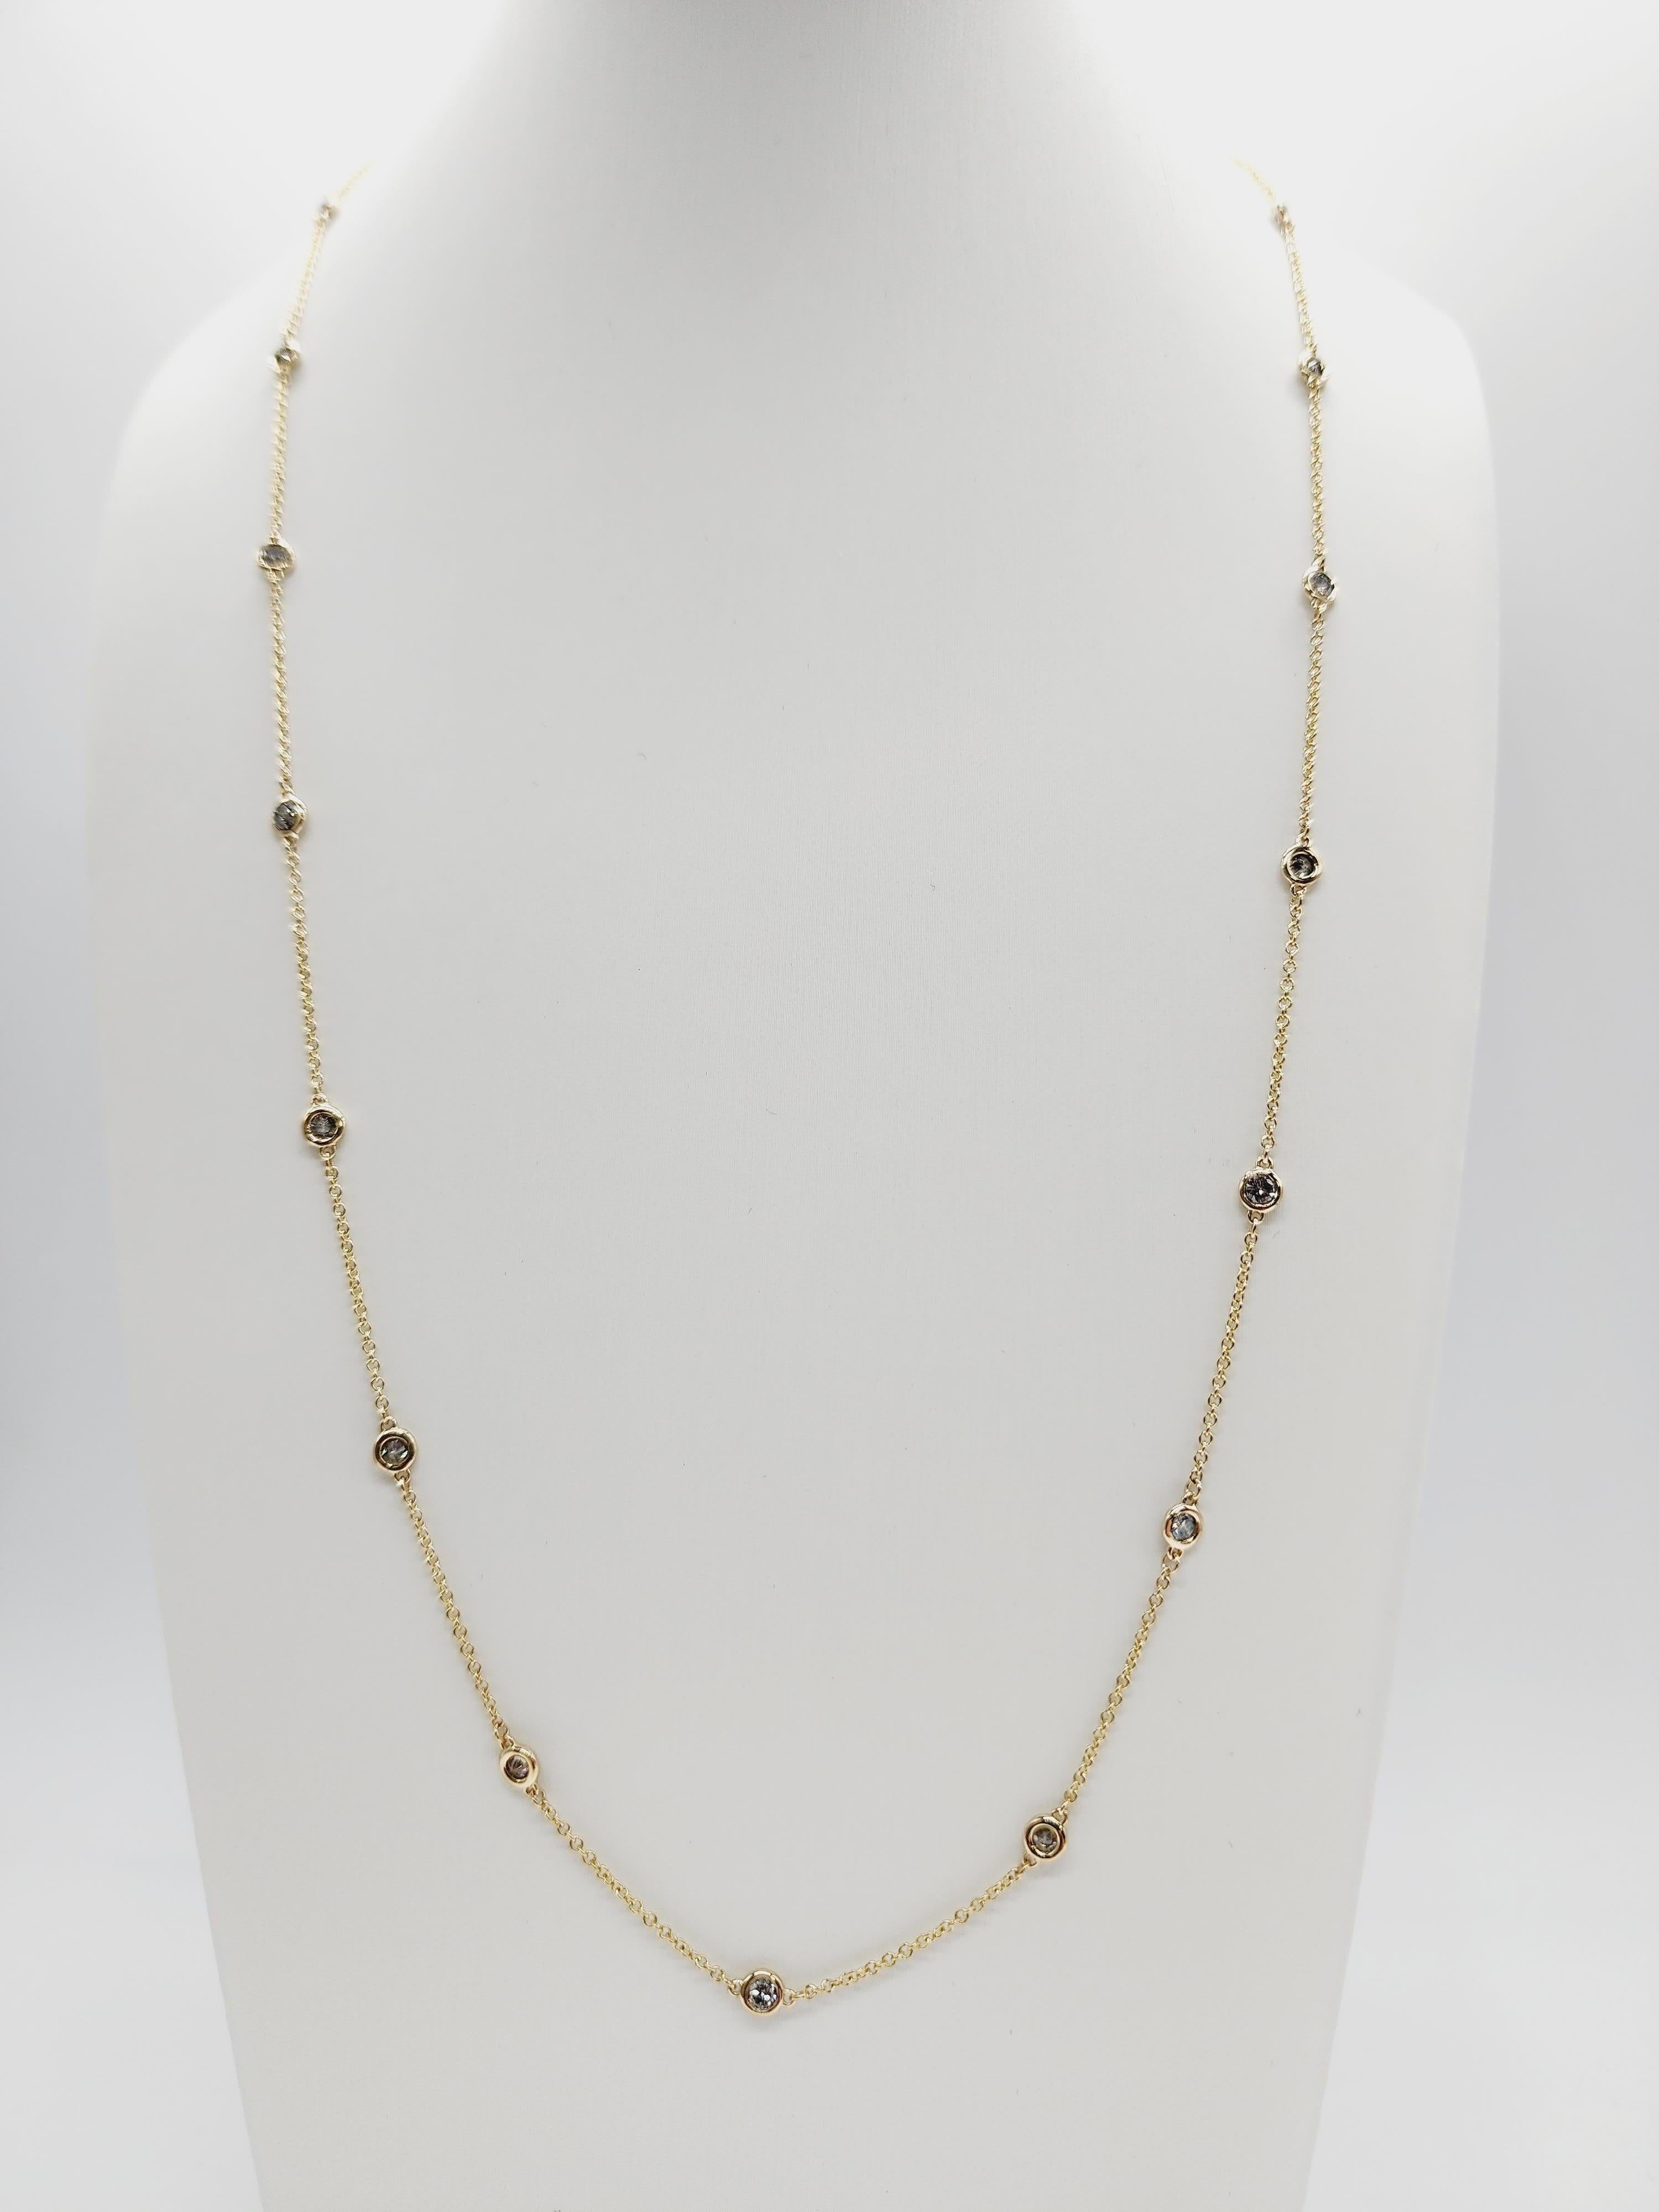 19 Stations Diamond by the yard necklace set in Italian made 14K yellow gold. The total weight is 1.50 carats. Beautiful shiny stones. The total length is 24 inch. Average I-SI.